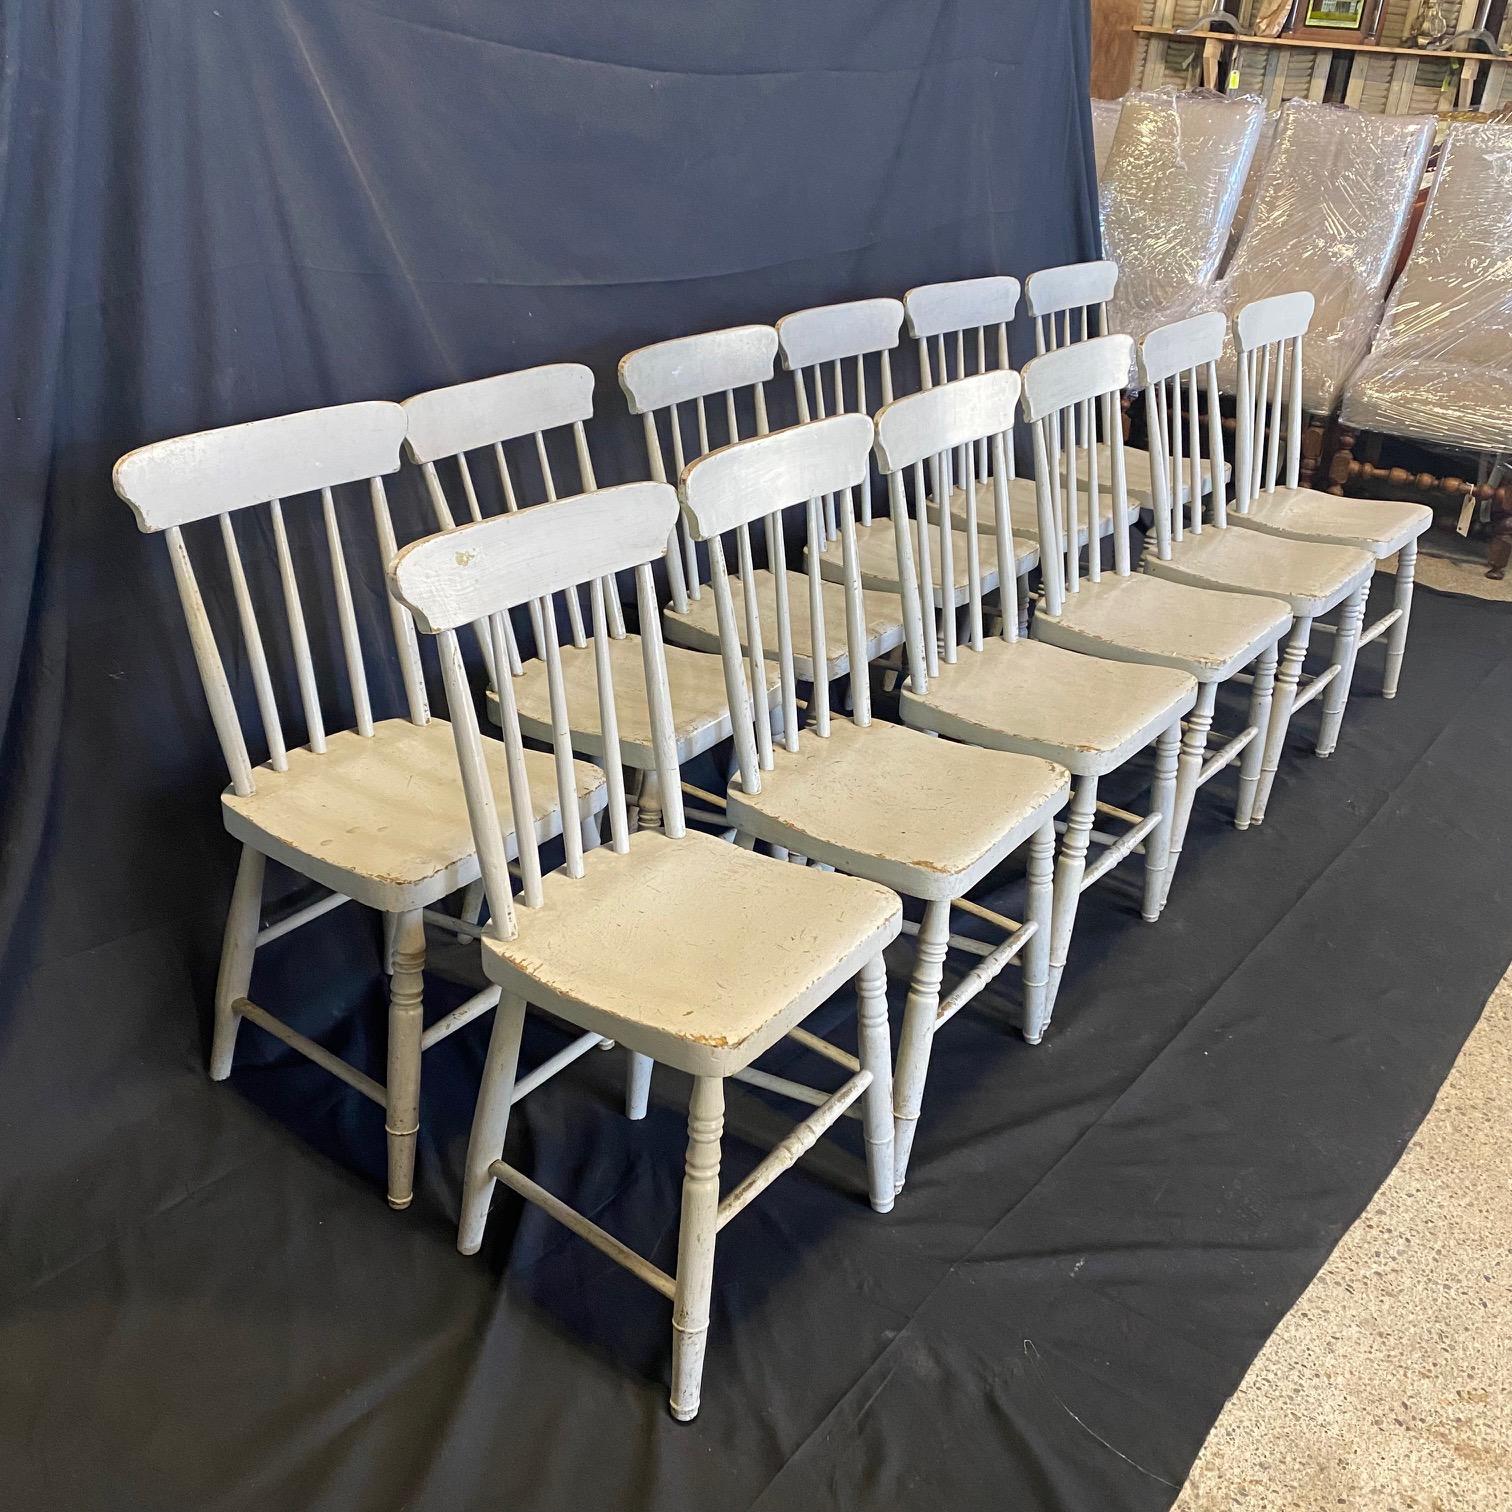 Classic sturdy plank seat oak grange chairs with early gray paint, from a grange in Maine. Will break up the set if desired.

#5718.